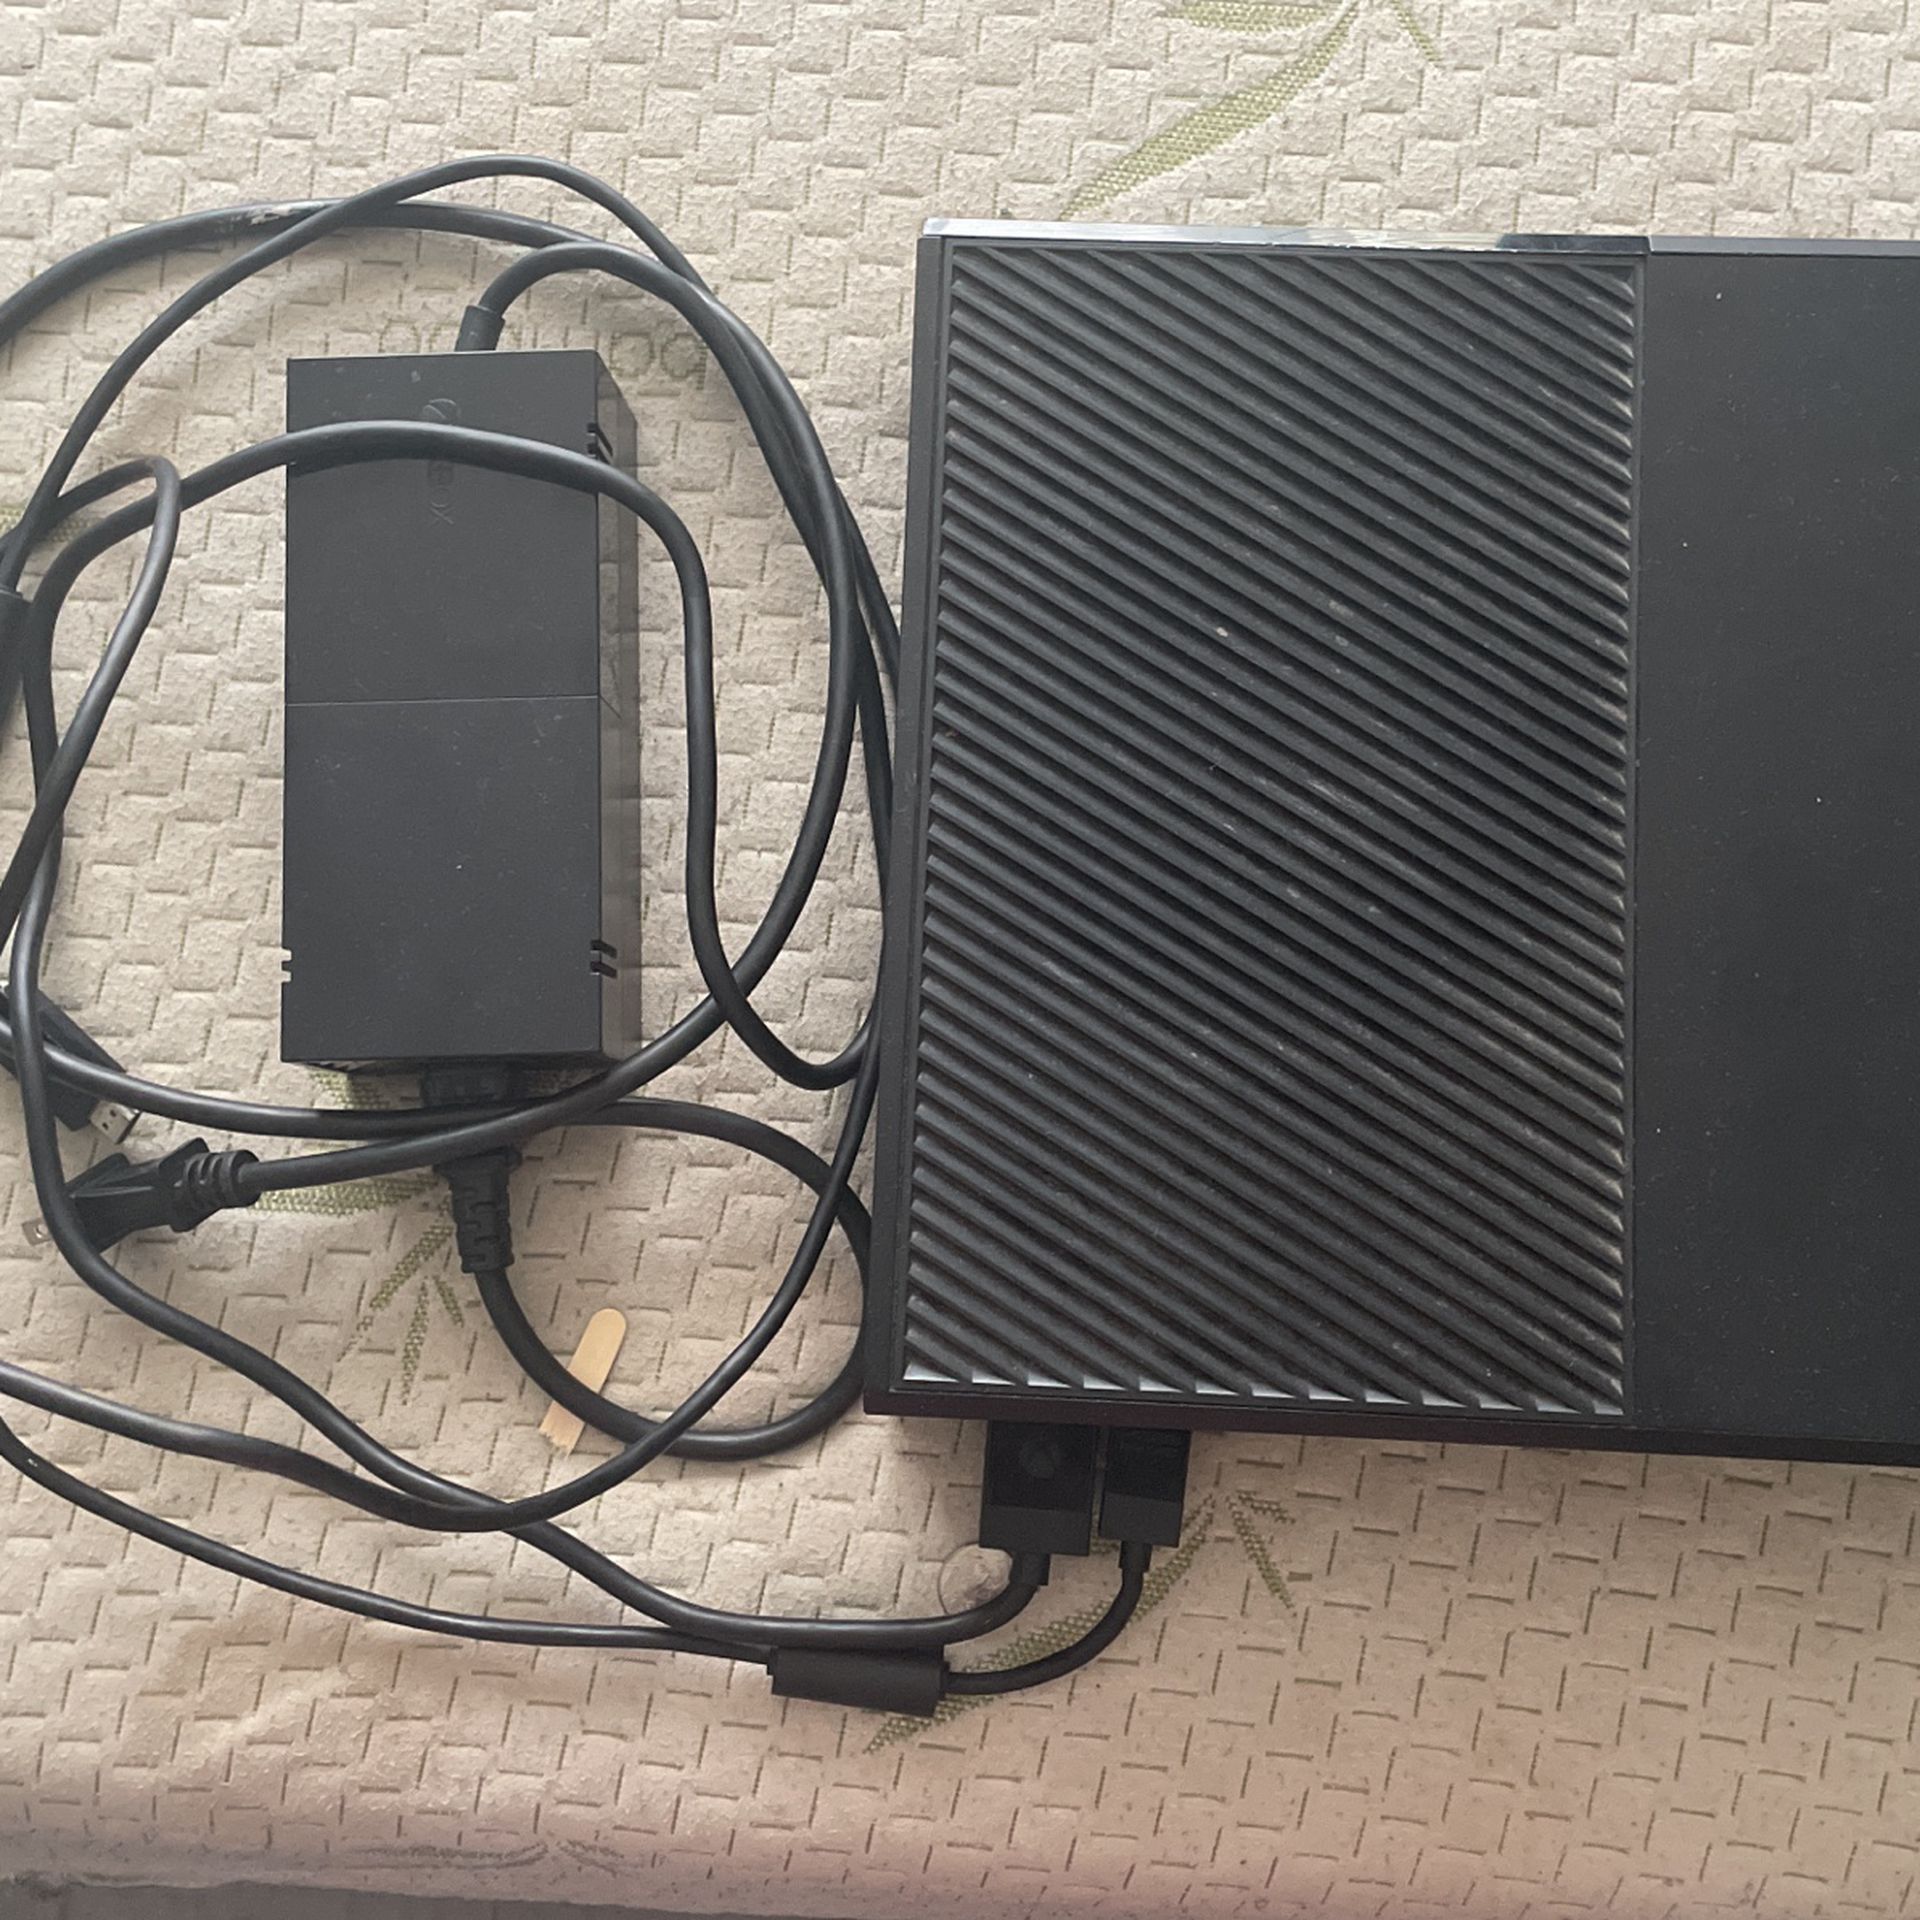 Xbox One (NO CONTROLLERS)